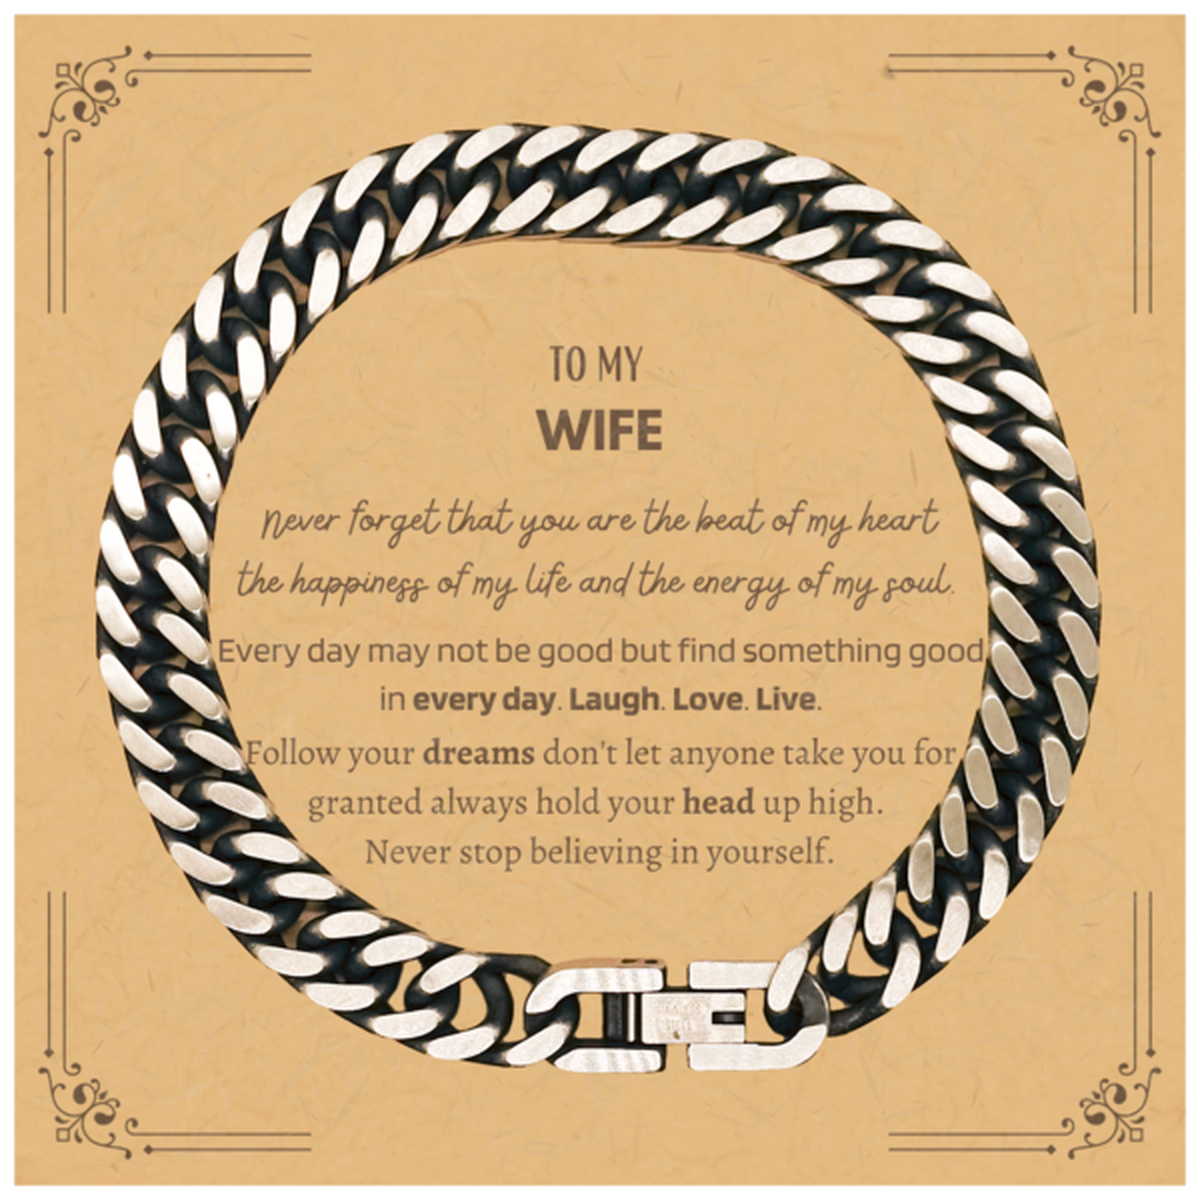 To My Wife Message Card Gifts, Christmas Wife Cuban Link Chain Bracelet Present, Birthday Unique Motivational For Wife, To My Wife Never forget that you are the beat of my heart the happiness of my life and the energy of my soul